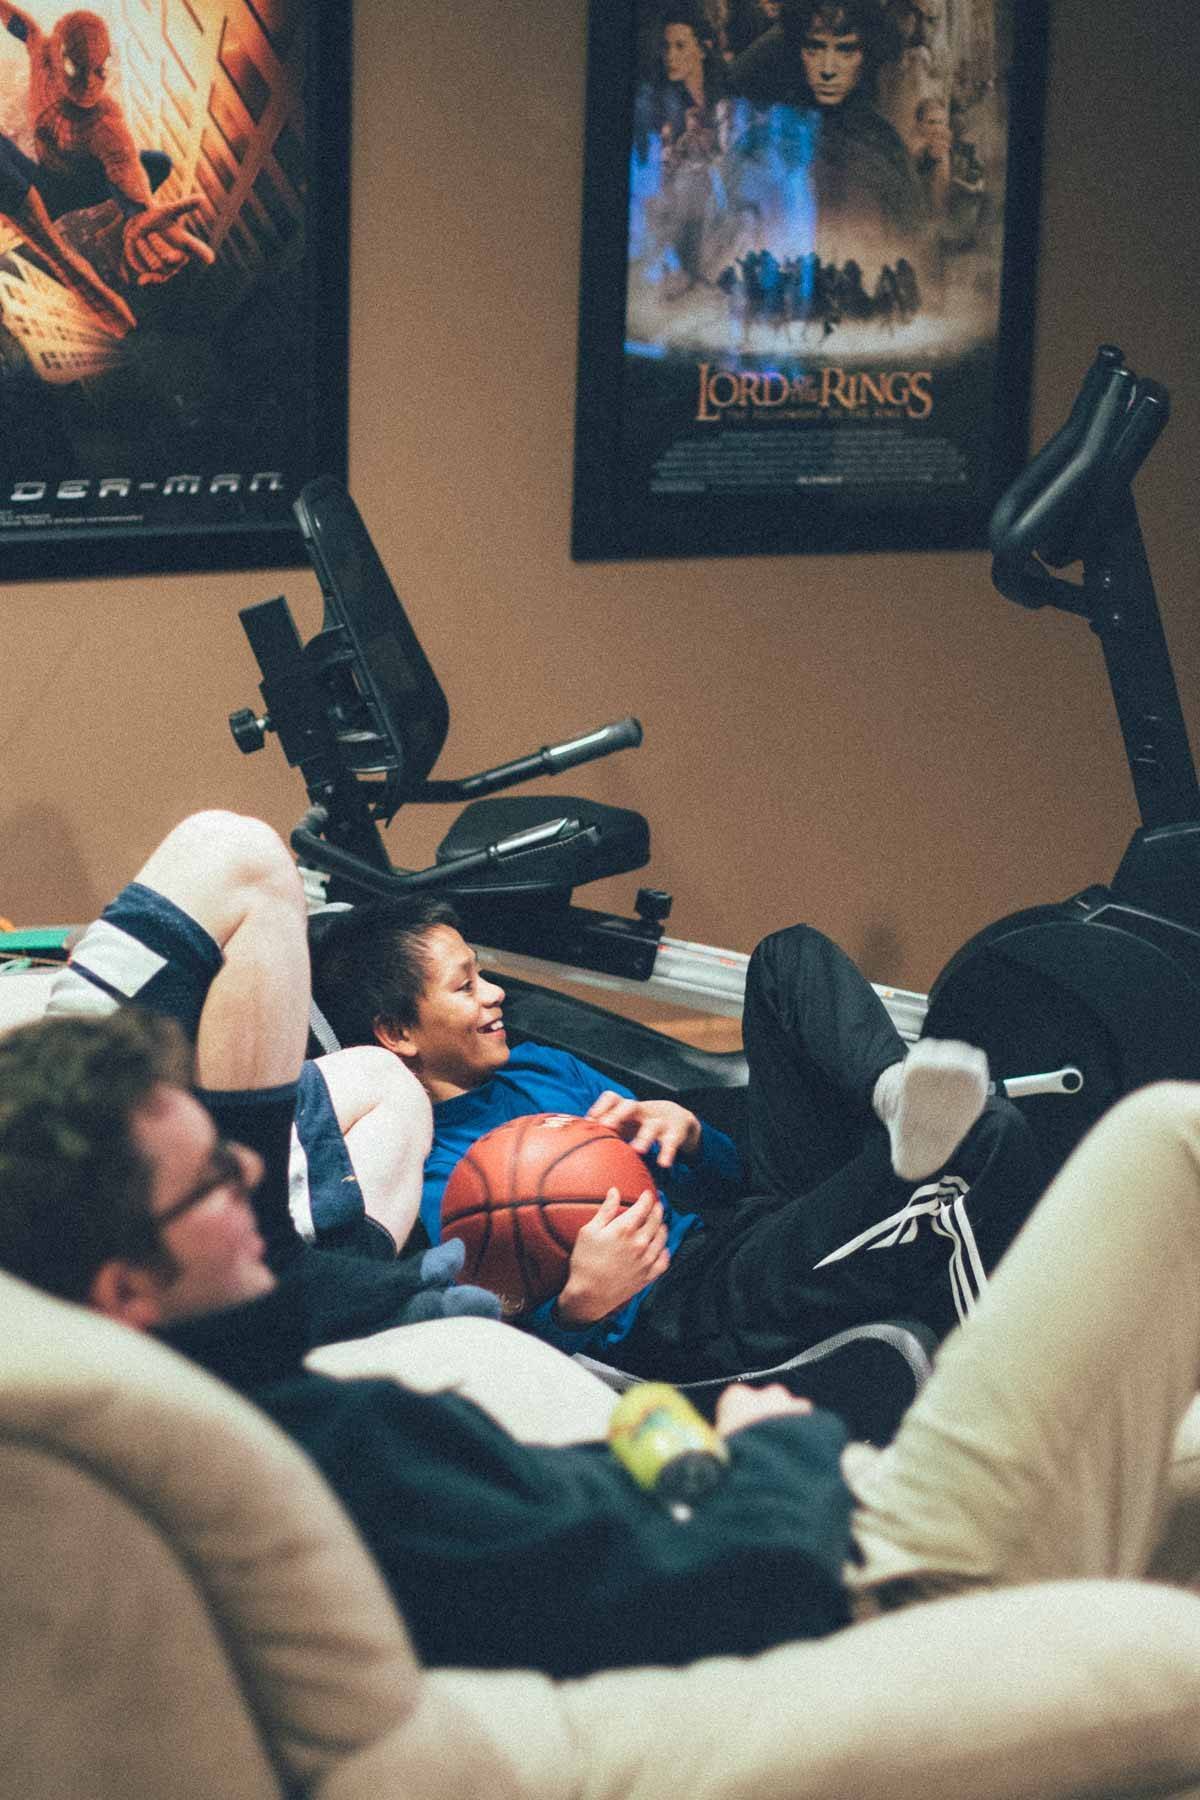 Boys in a game room.